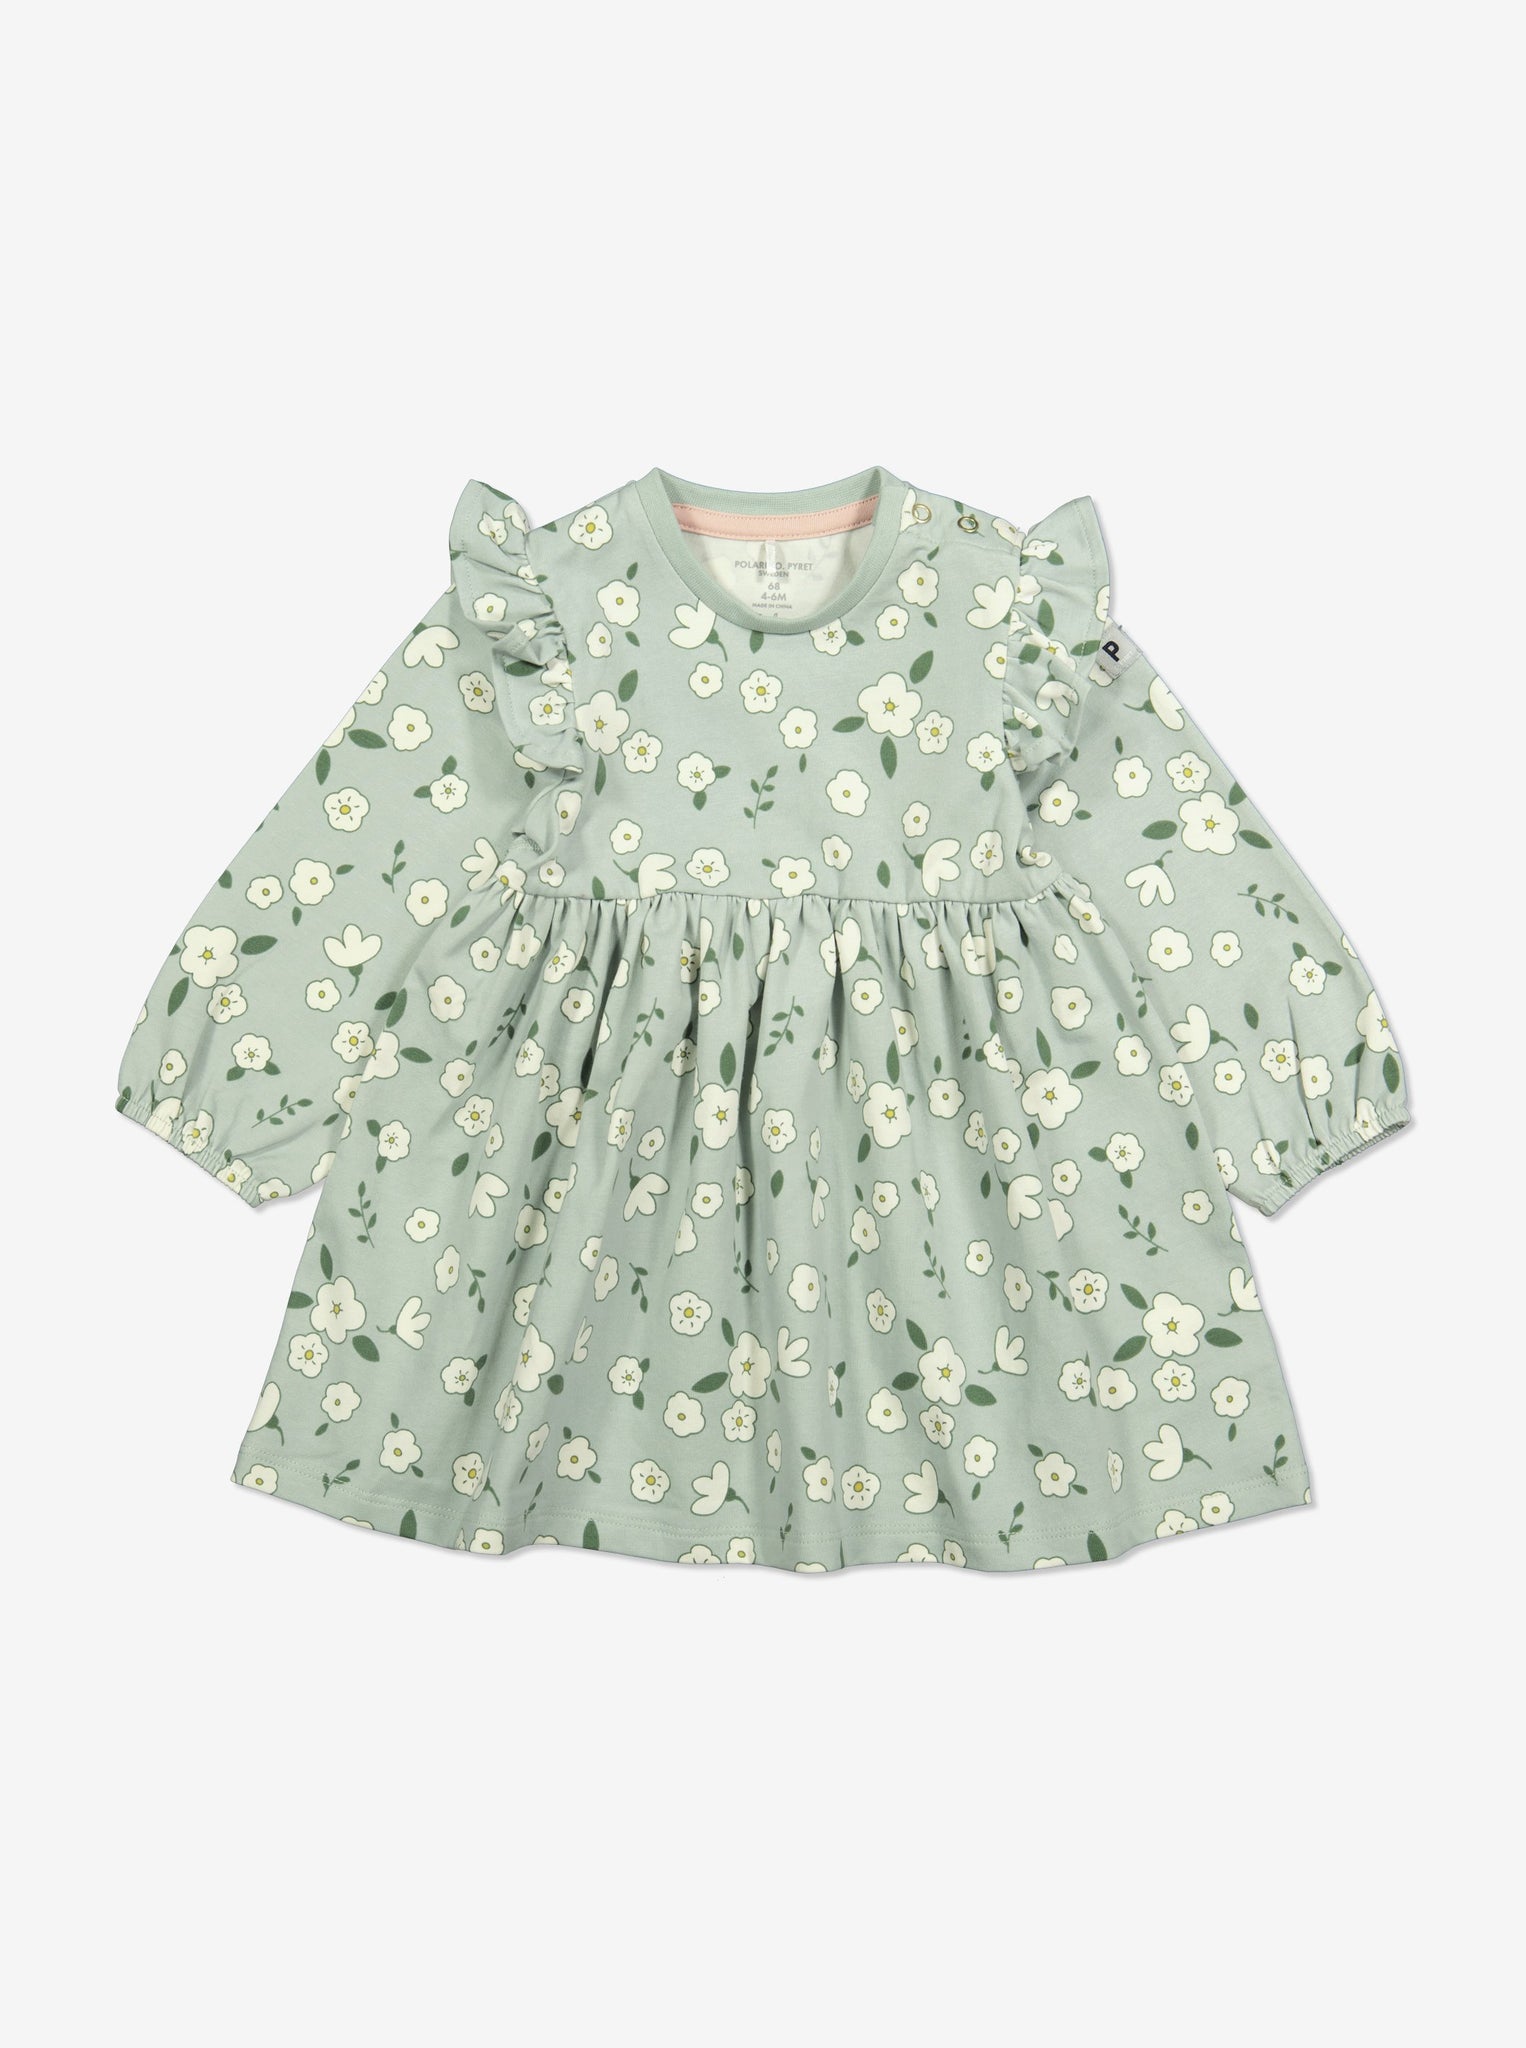  Organic Green Floral Girls Dress from Polarn O. Pyret Kidswear. Made from environmentally friendly materials.